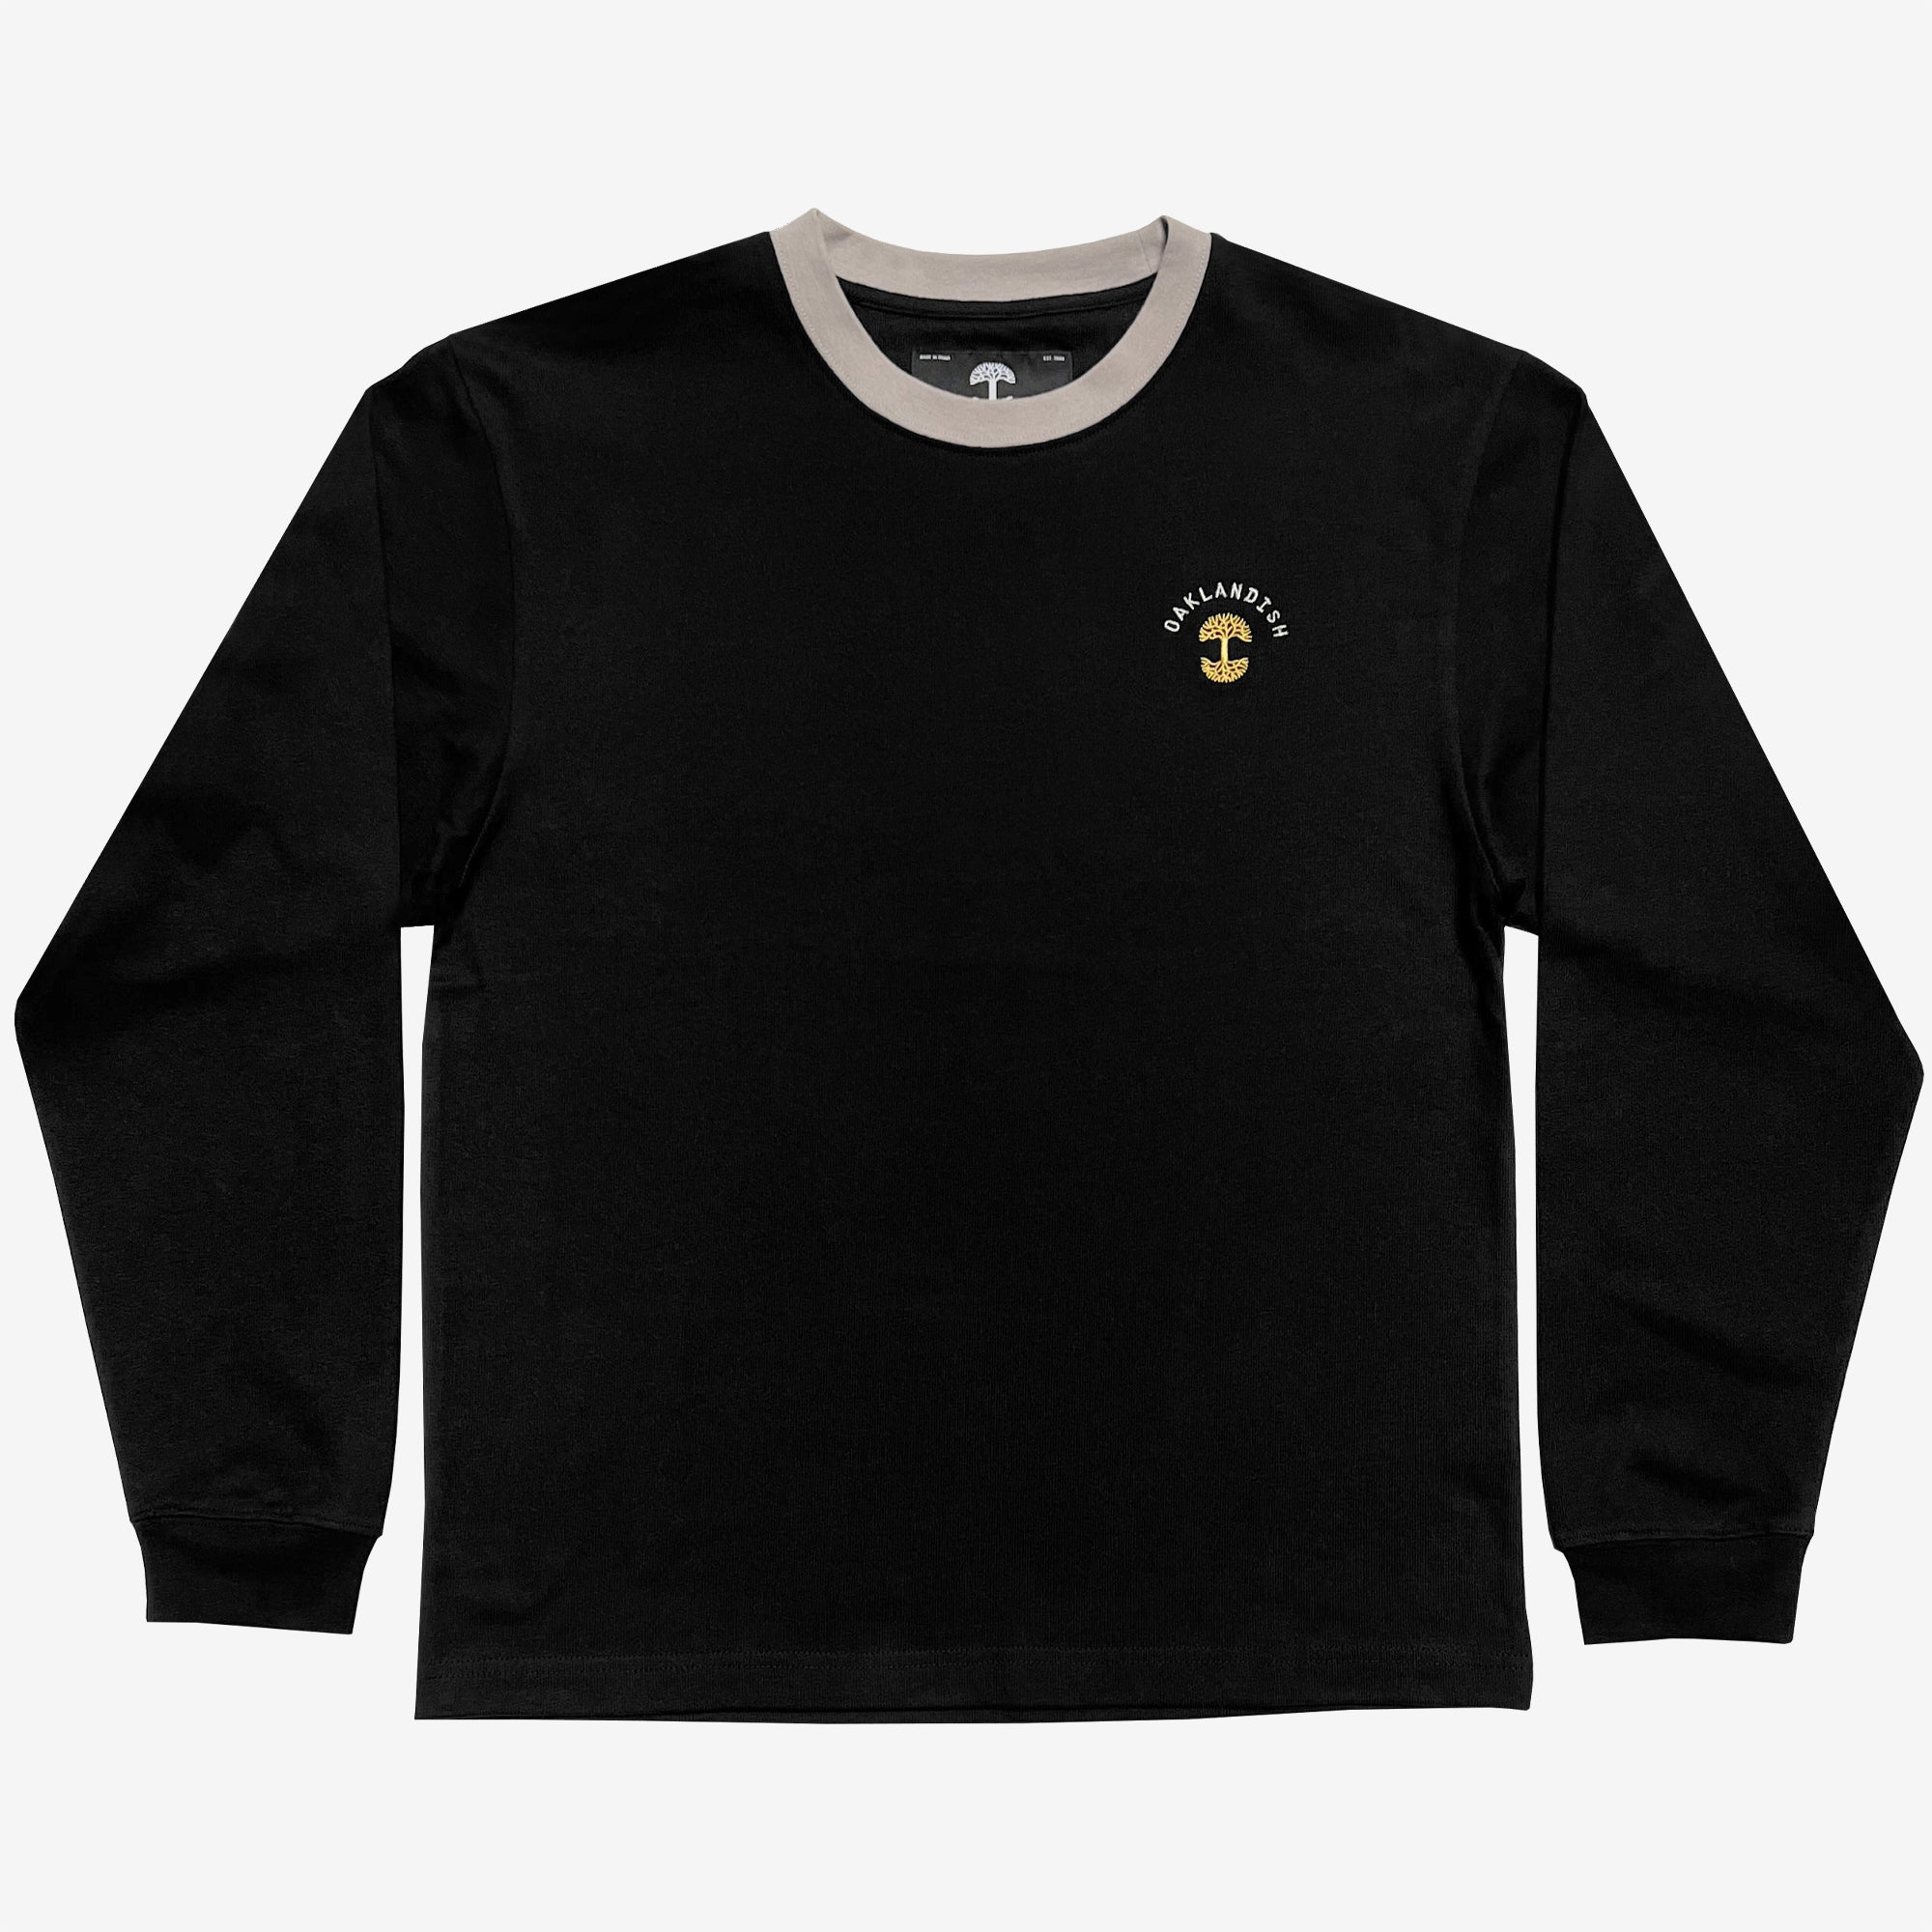 Black long sleeve crew neck tee with a gold Oaklandish tree logo, white wordmark on the left chest, and grey trim on neck.